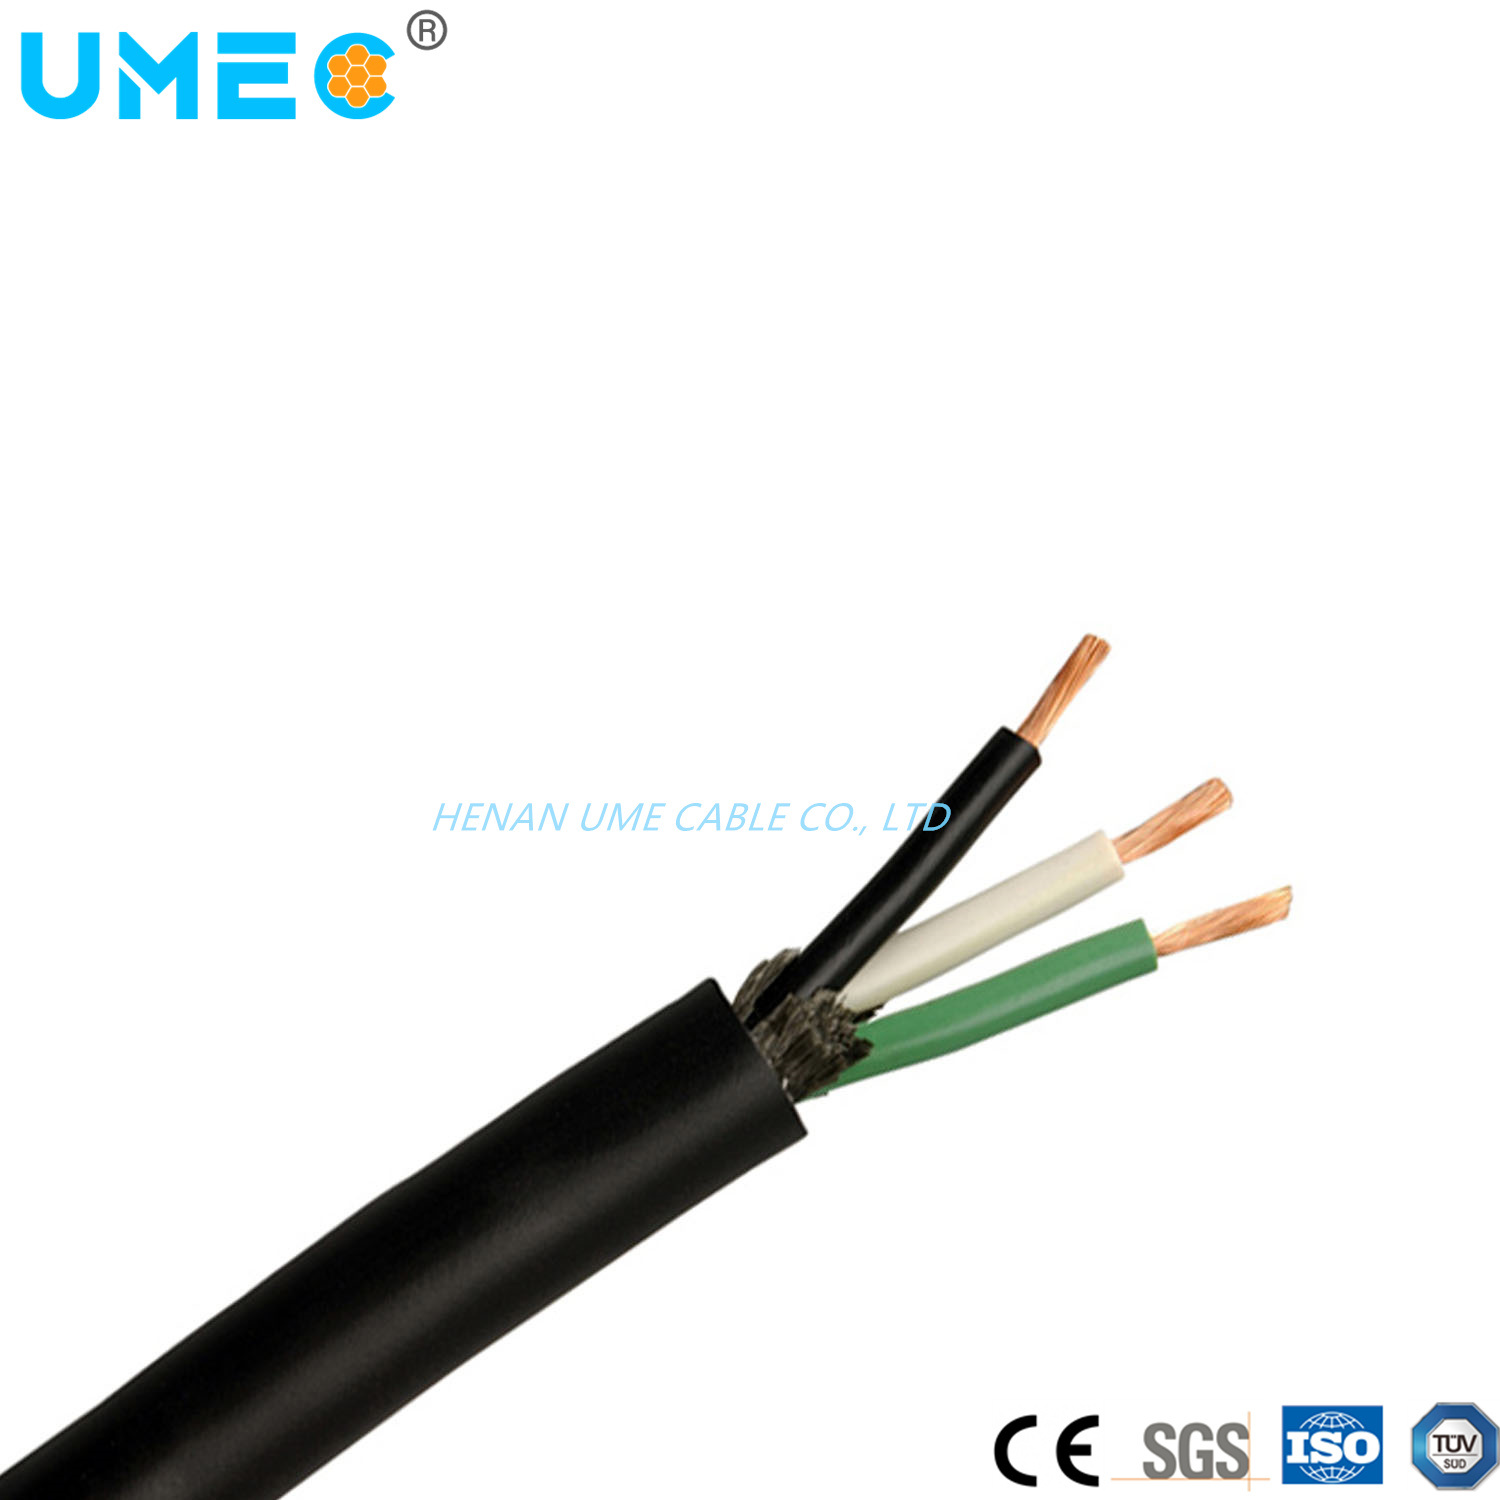 Factory Direct Price Oil and Water Resistant Jacketed Cord So Sow Soow Sjoow EPDM Rubber Cable